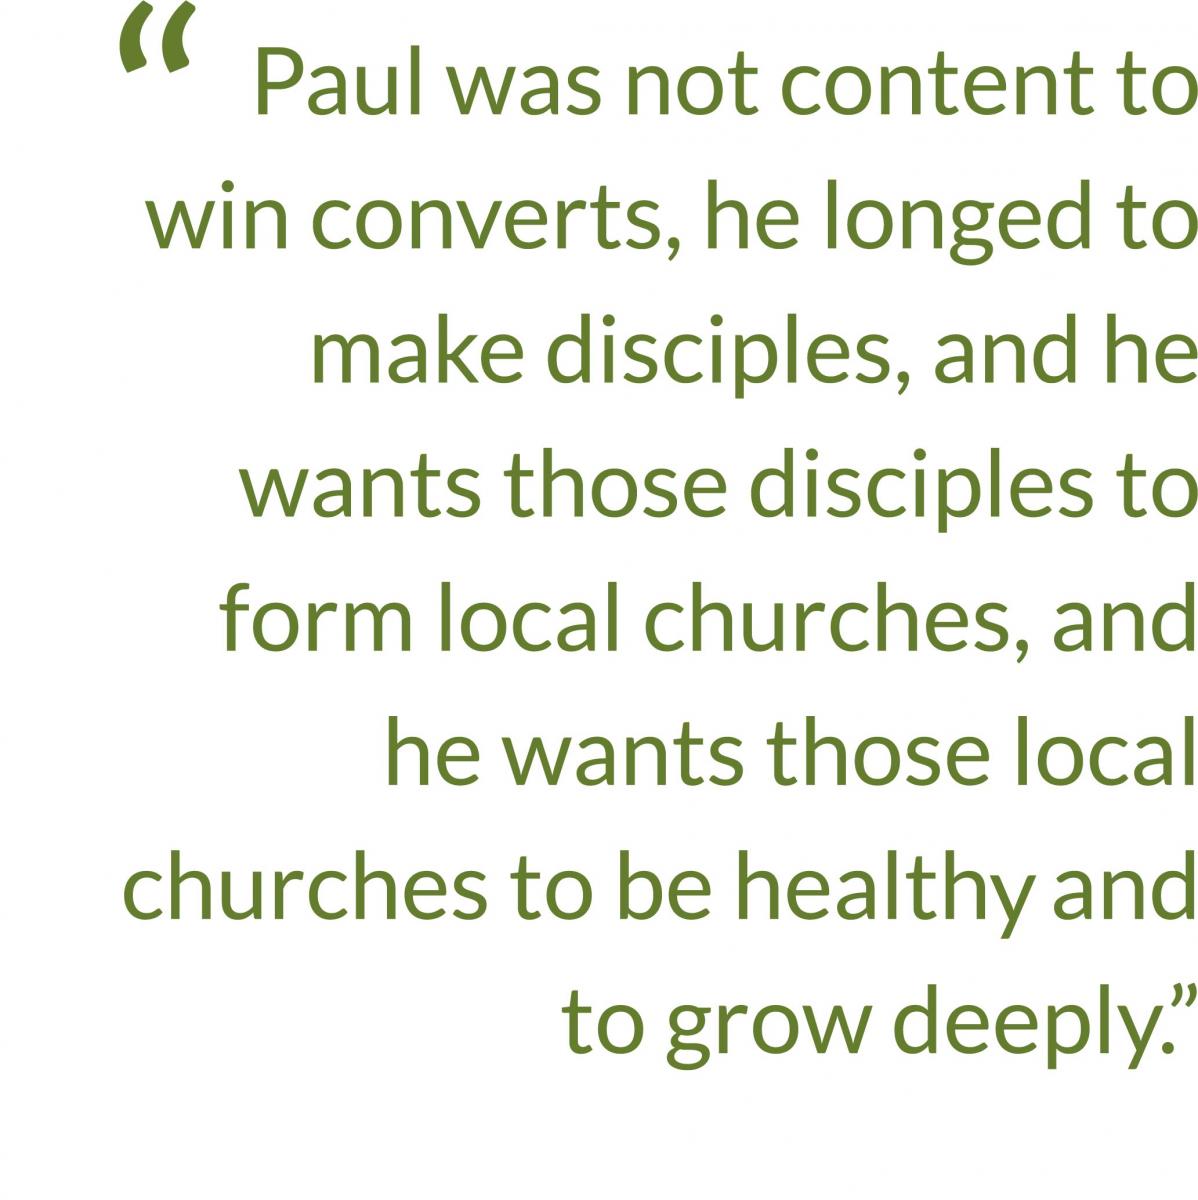 Quote: Paul was not content to win converts, he longed to make disciples, and we wants those disciples to form local churches, and he wants those local churches to be health and to grow deeply.